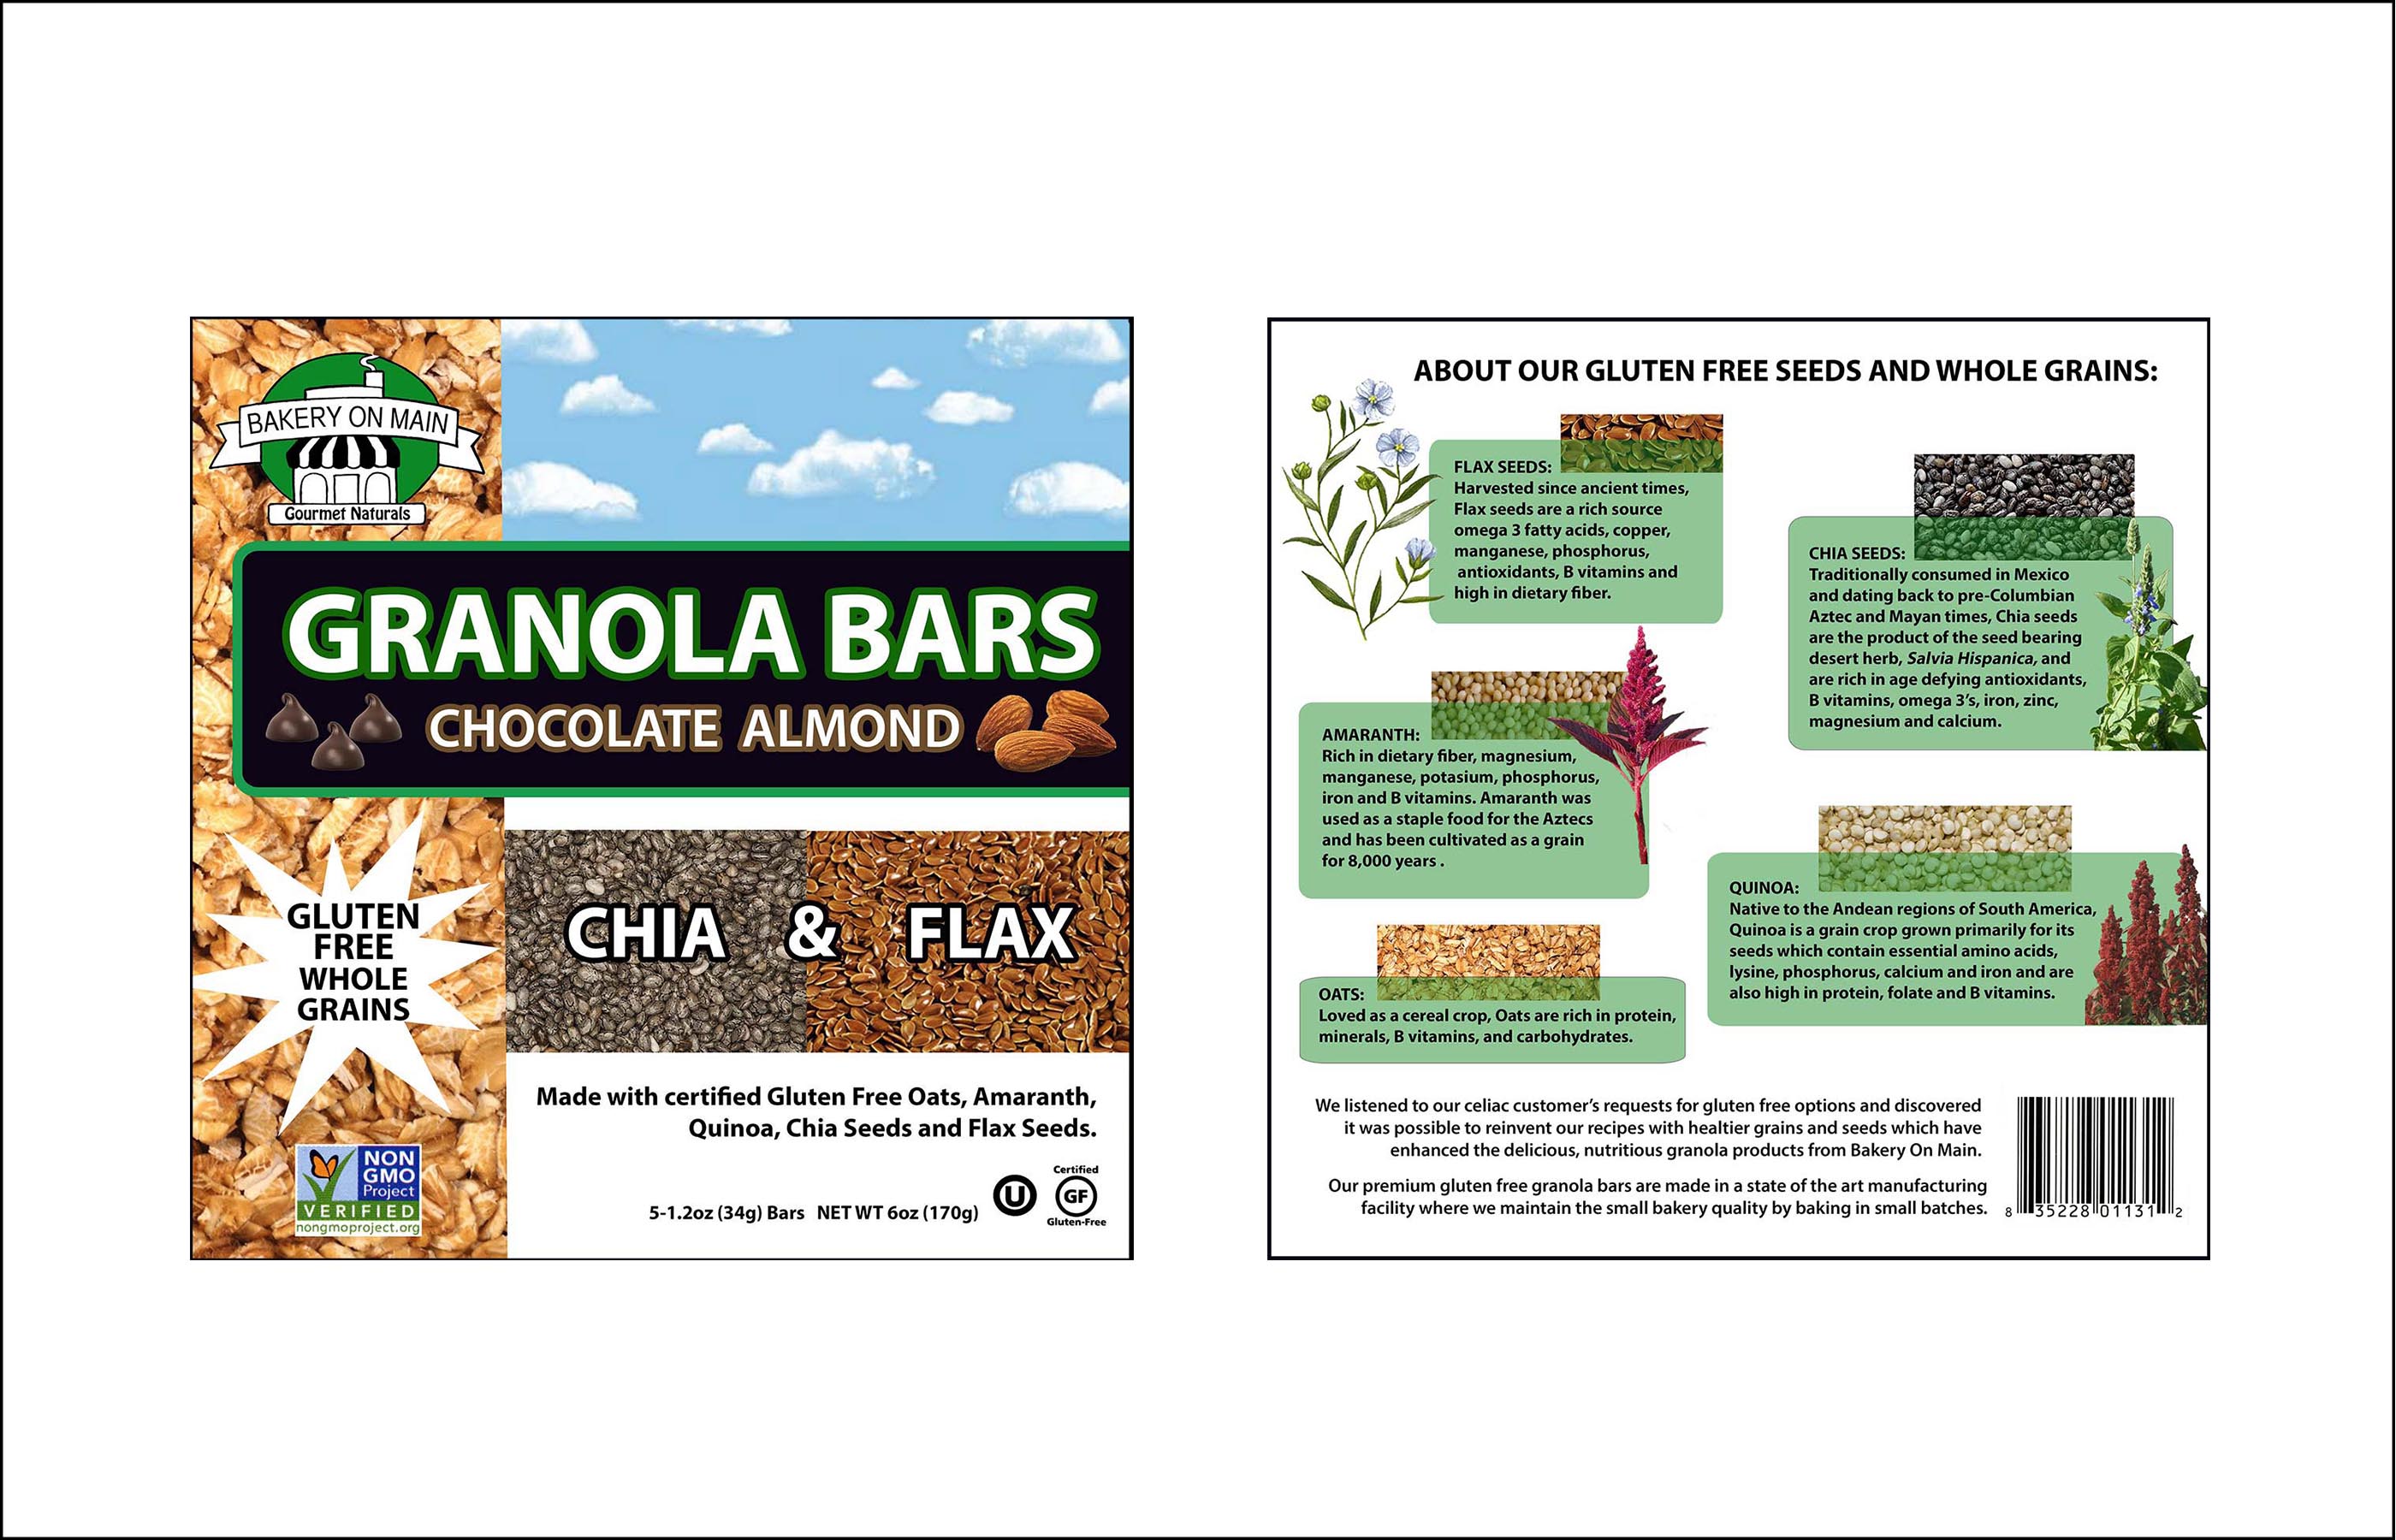 Front and back view of packaging project made for graphic design class